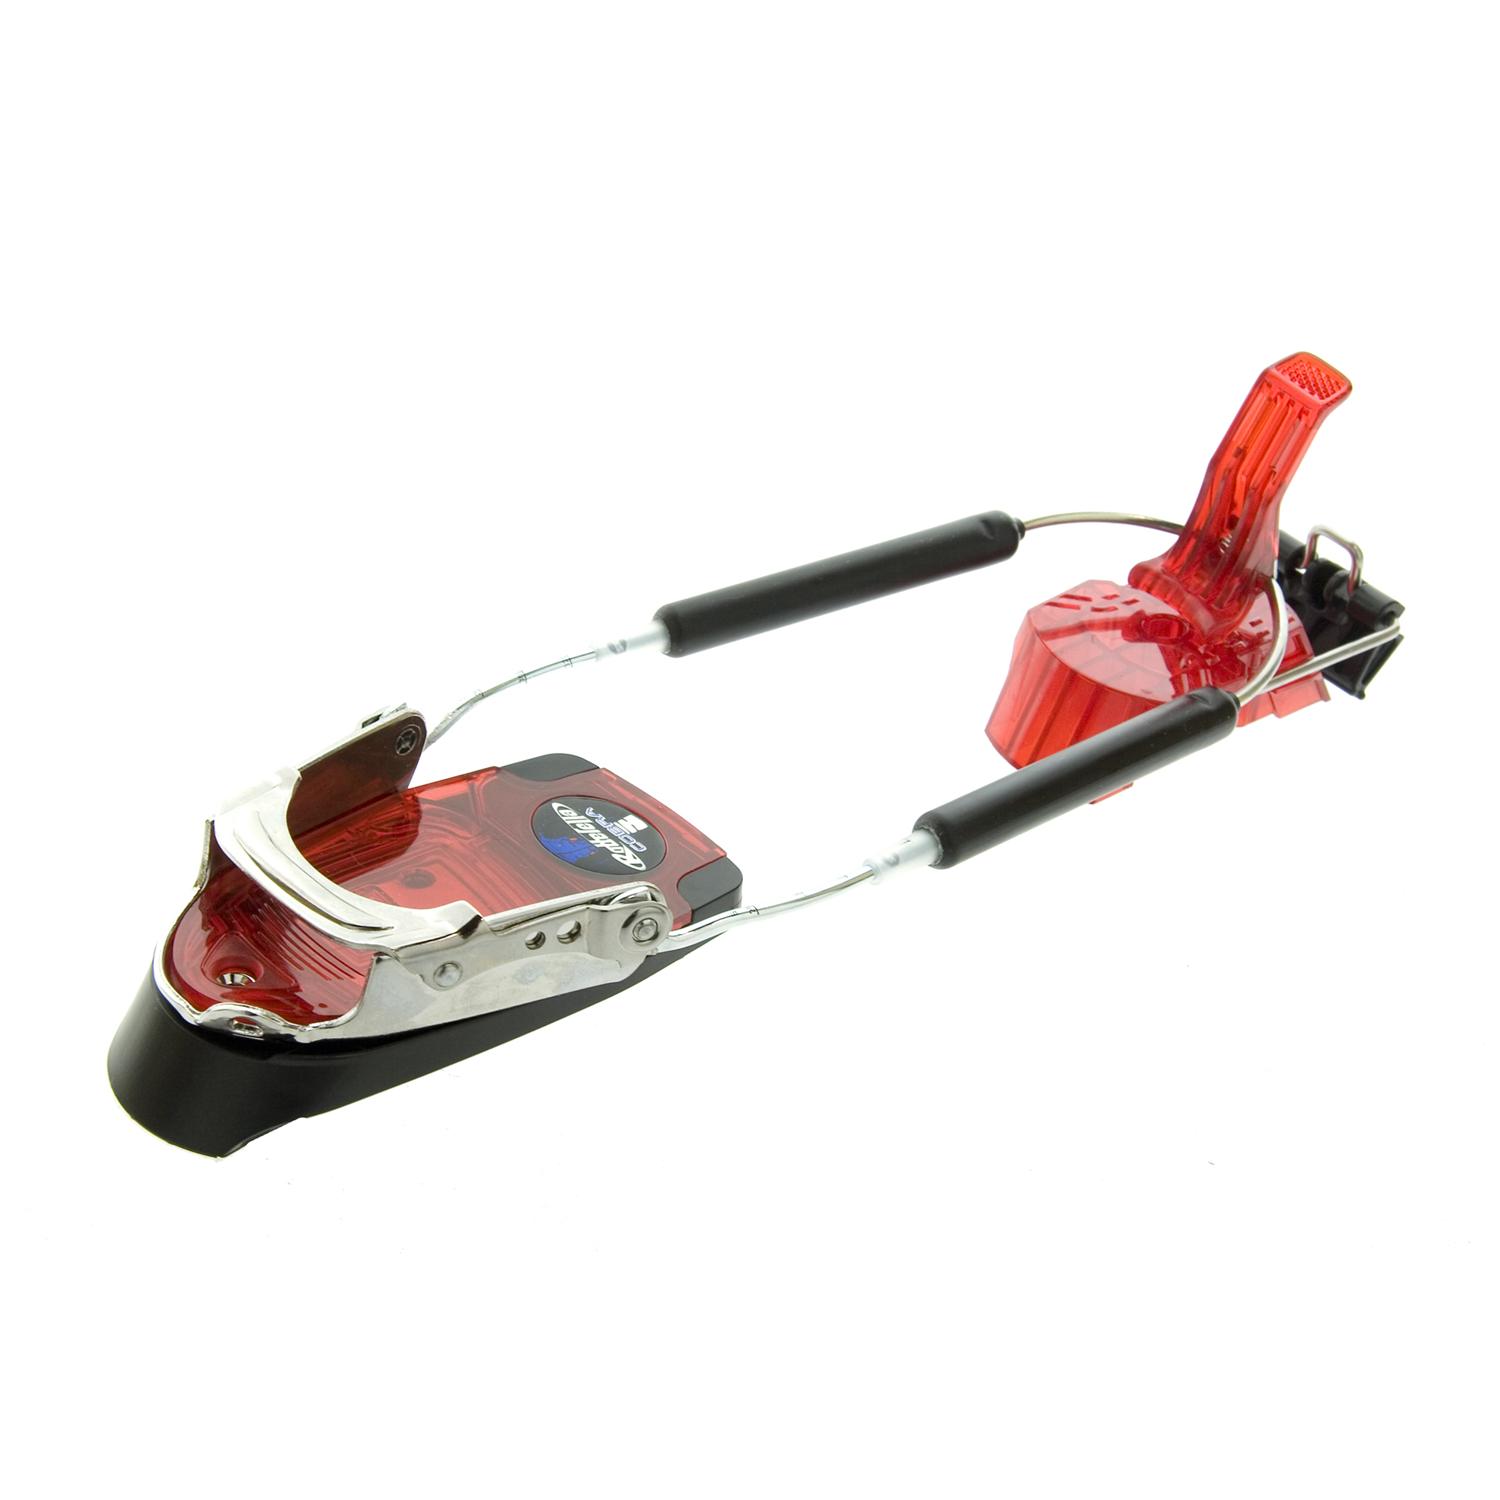 Rottefella Cobra R8 Hardwire Tele Binding-Red 23-28.5 2006 | evo outlet